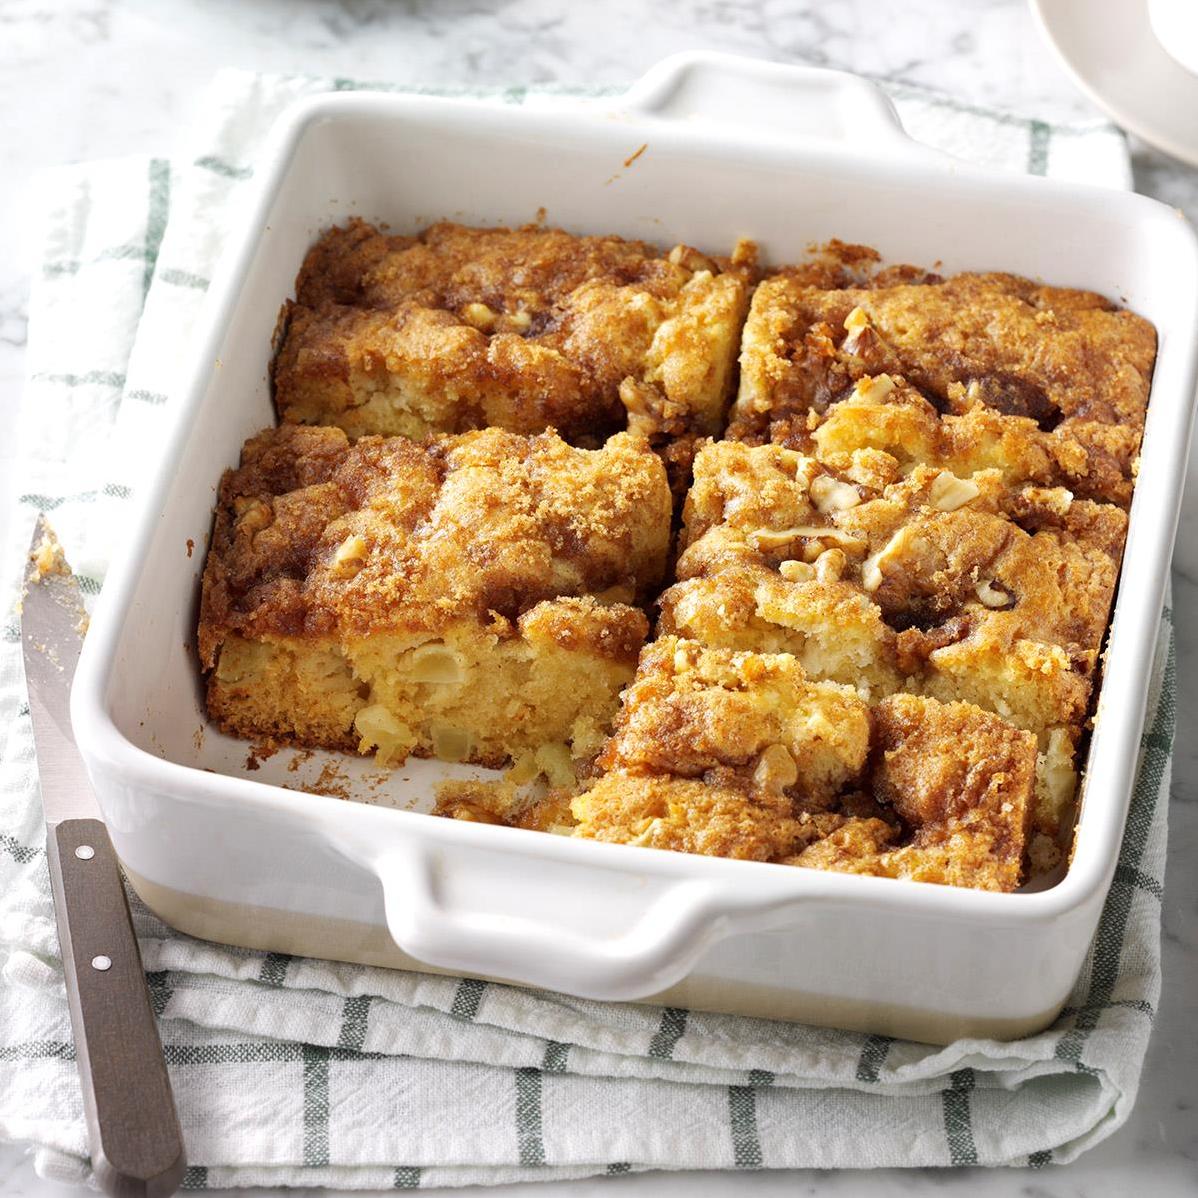 Scrumptious Apple Coffee Cake That Melts in Your Mouth